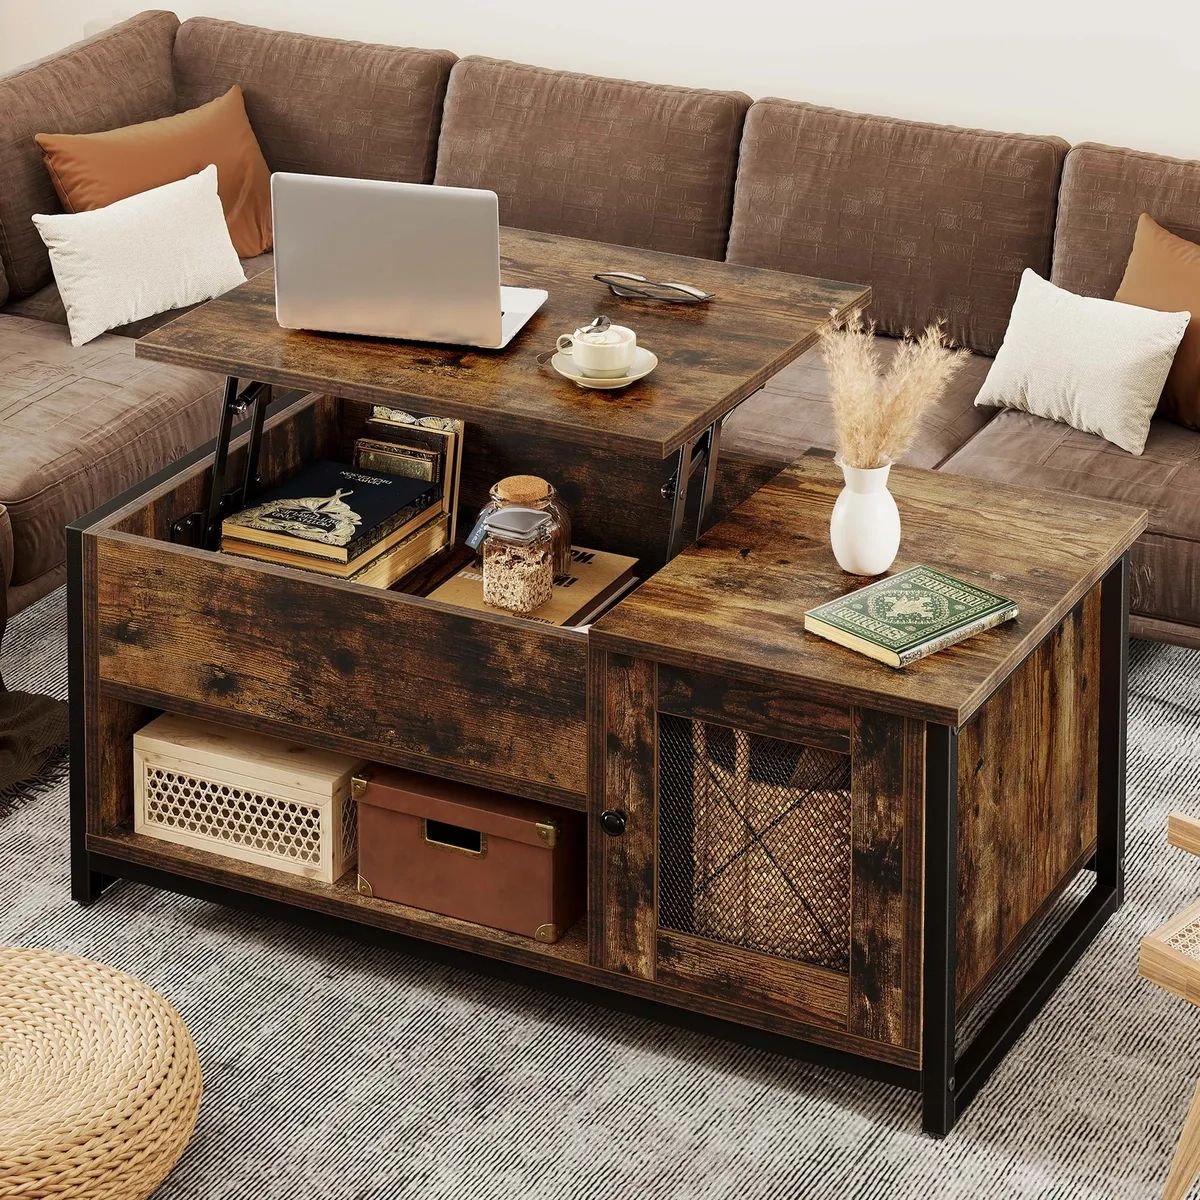 Farmhouse Lift Top Coffee Table With Hidden Compartment And Storage Shelf  Brown | Ebay Throughout Lift Top Coffee Tables With Hidden Storage Compartments (Photo 3 of 15)